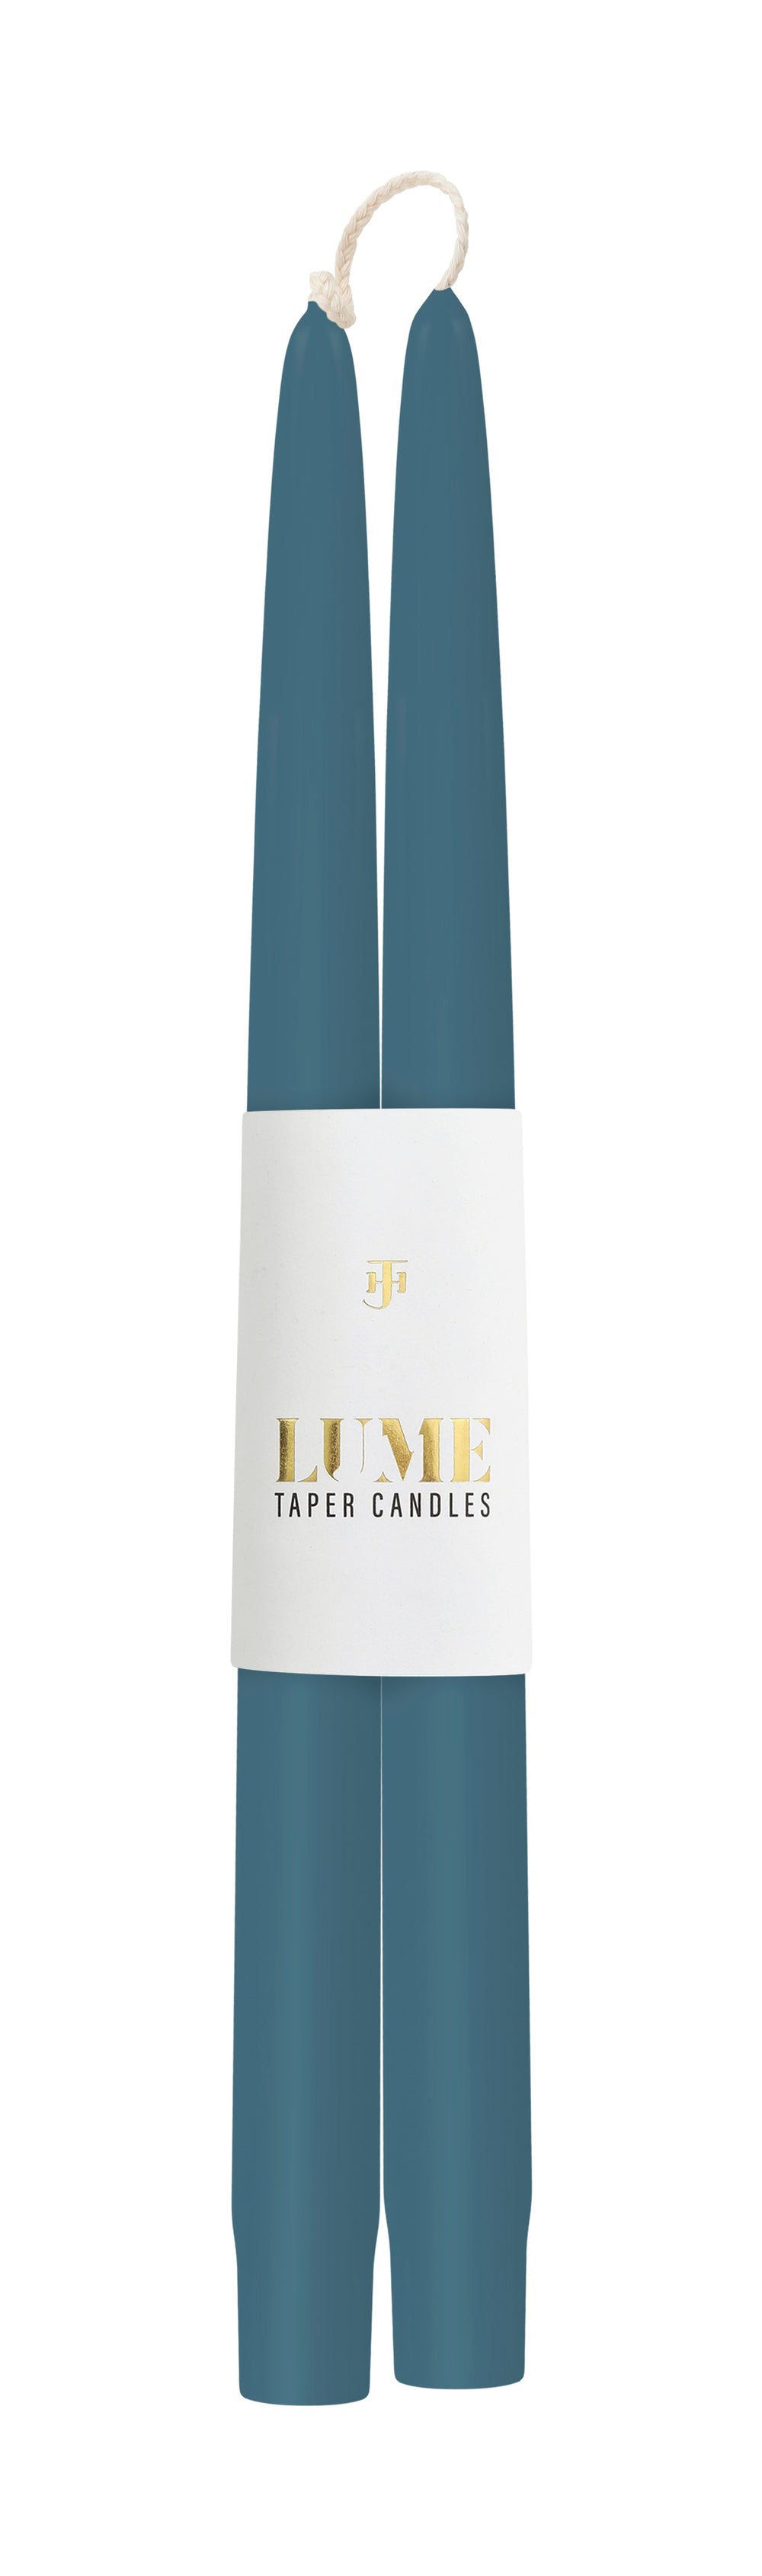 JH Lume Taper Candles